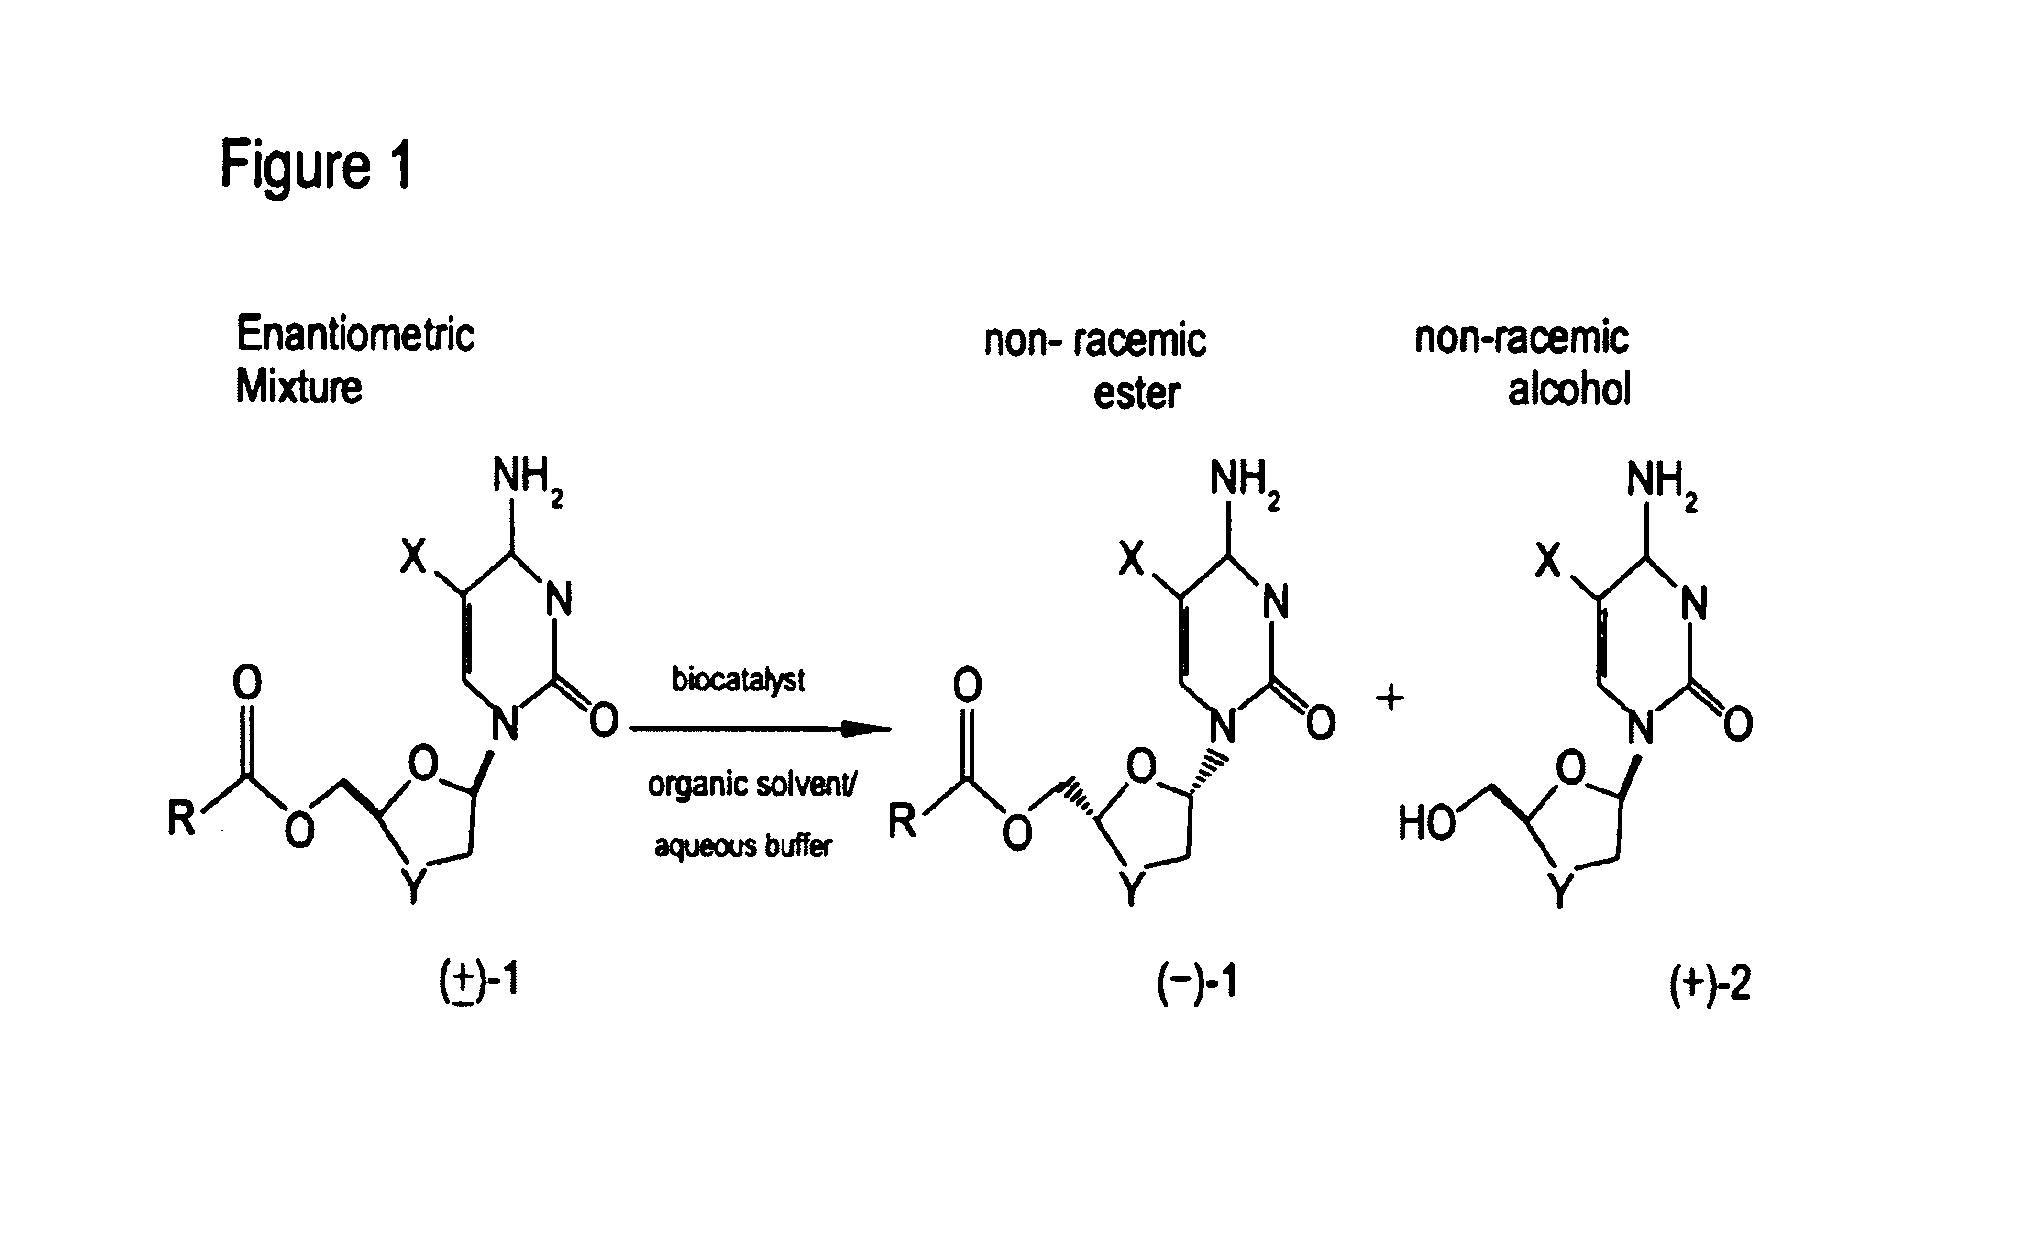 Non-homogeneous systems for the resolution of enantiomeric mixtures